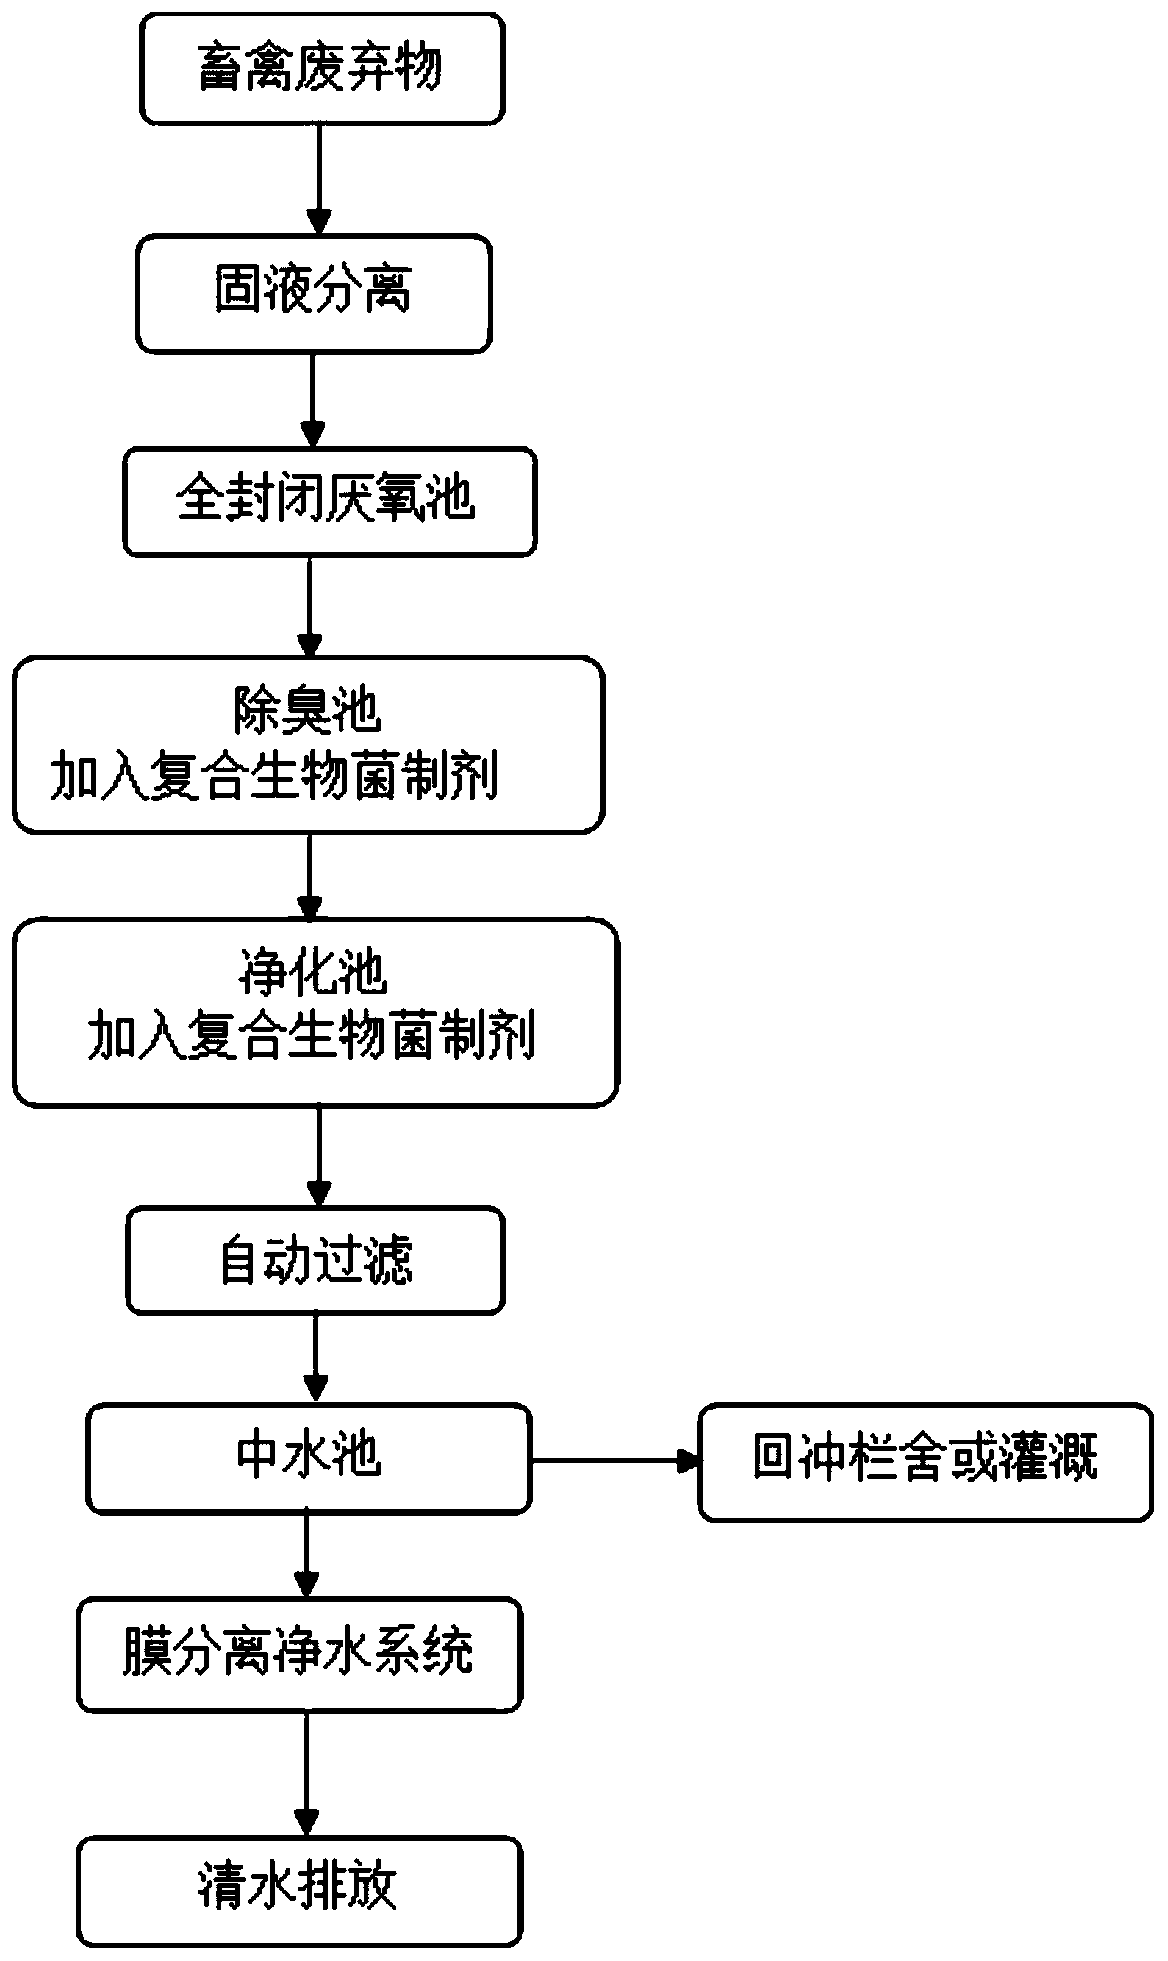 Livestock and poultry waste recycling method